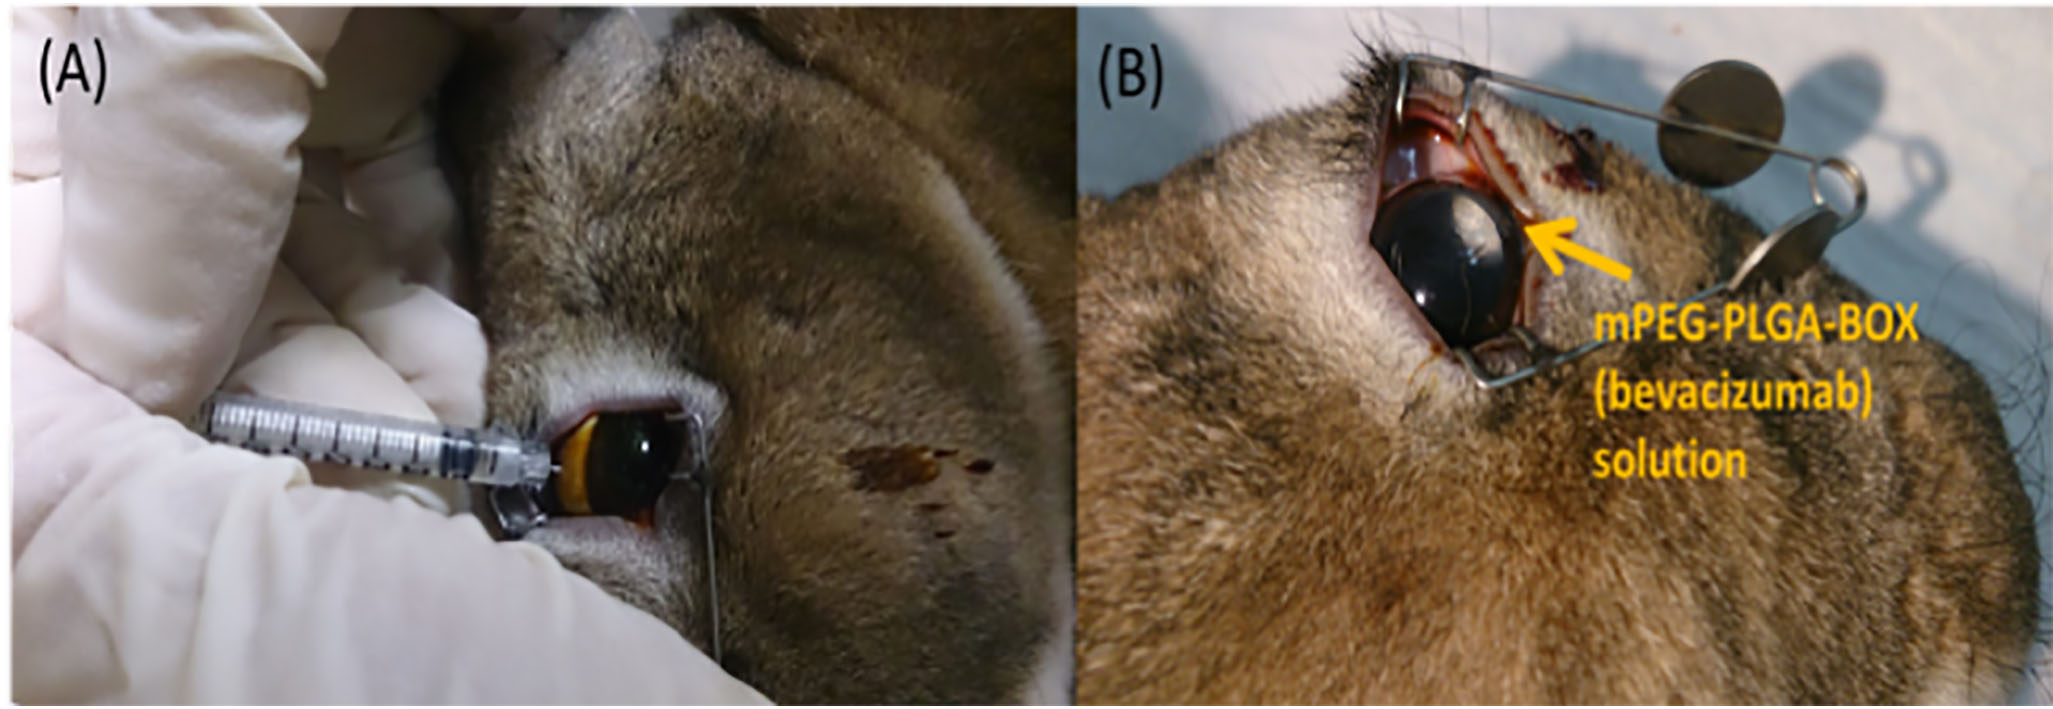 (A) Intravitreal injection of mPEG-PLGA-BOX (bevacizumab) solution at superior position. (B) mPEG-PLGA-BOX (bevacizumab) solution became white and resided at the superior position of the rabbit’s eye.